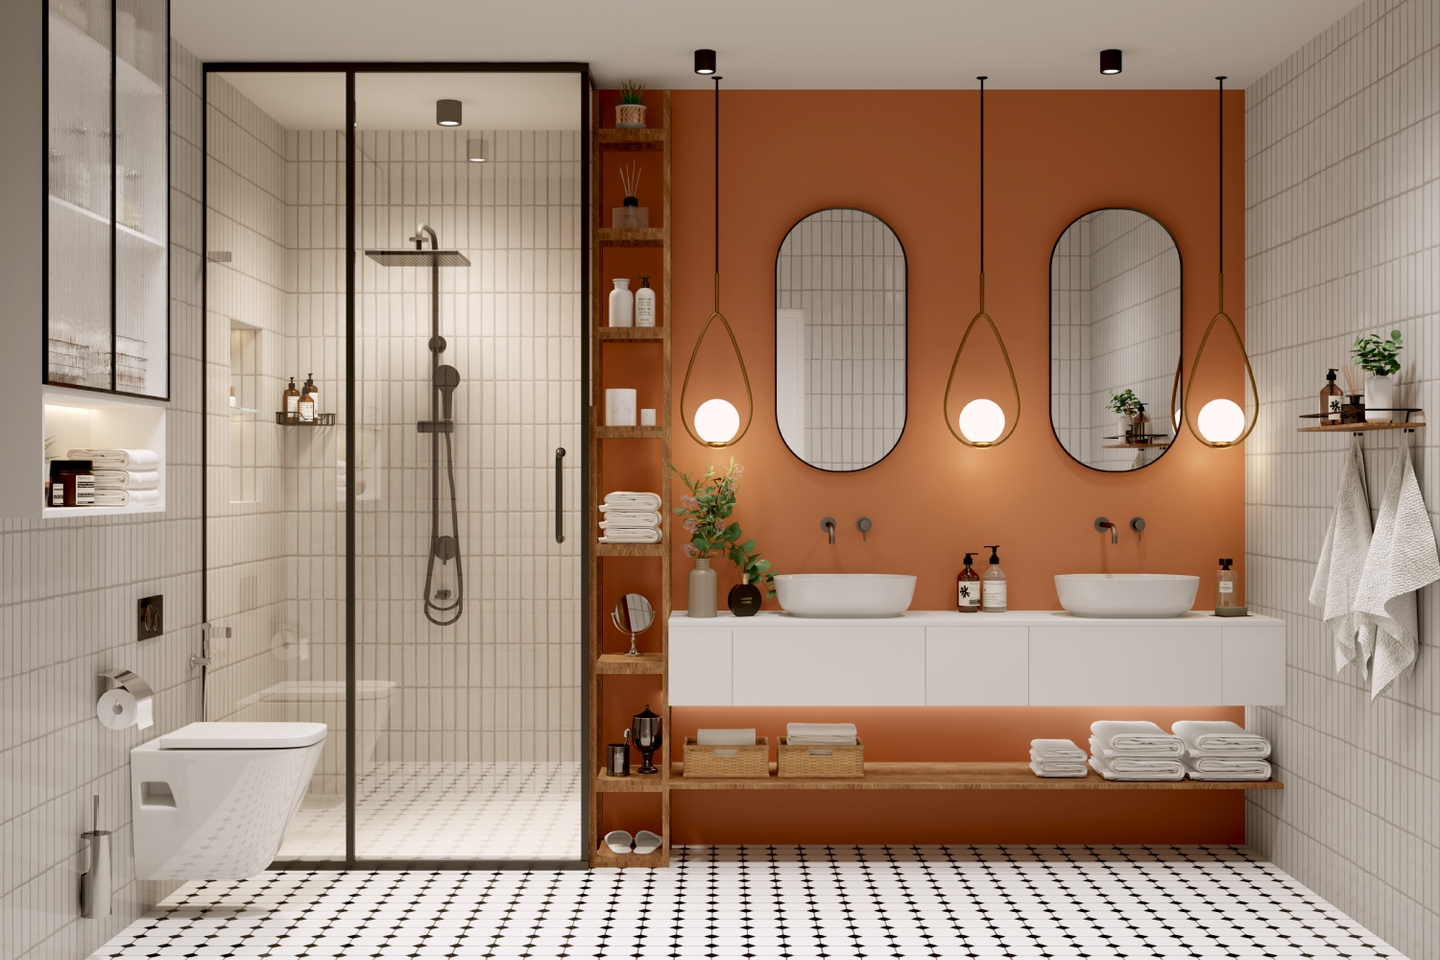 Bathroom Design With Orange And White Tiles And A Wall-Mounted Vanity - Livspace